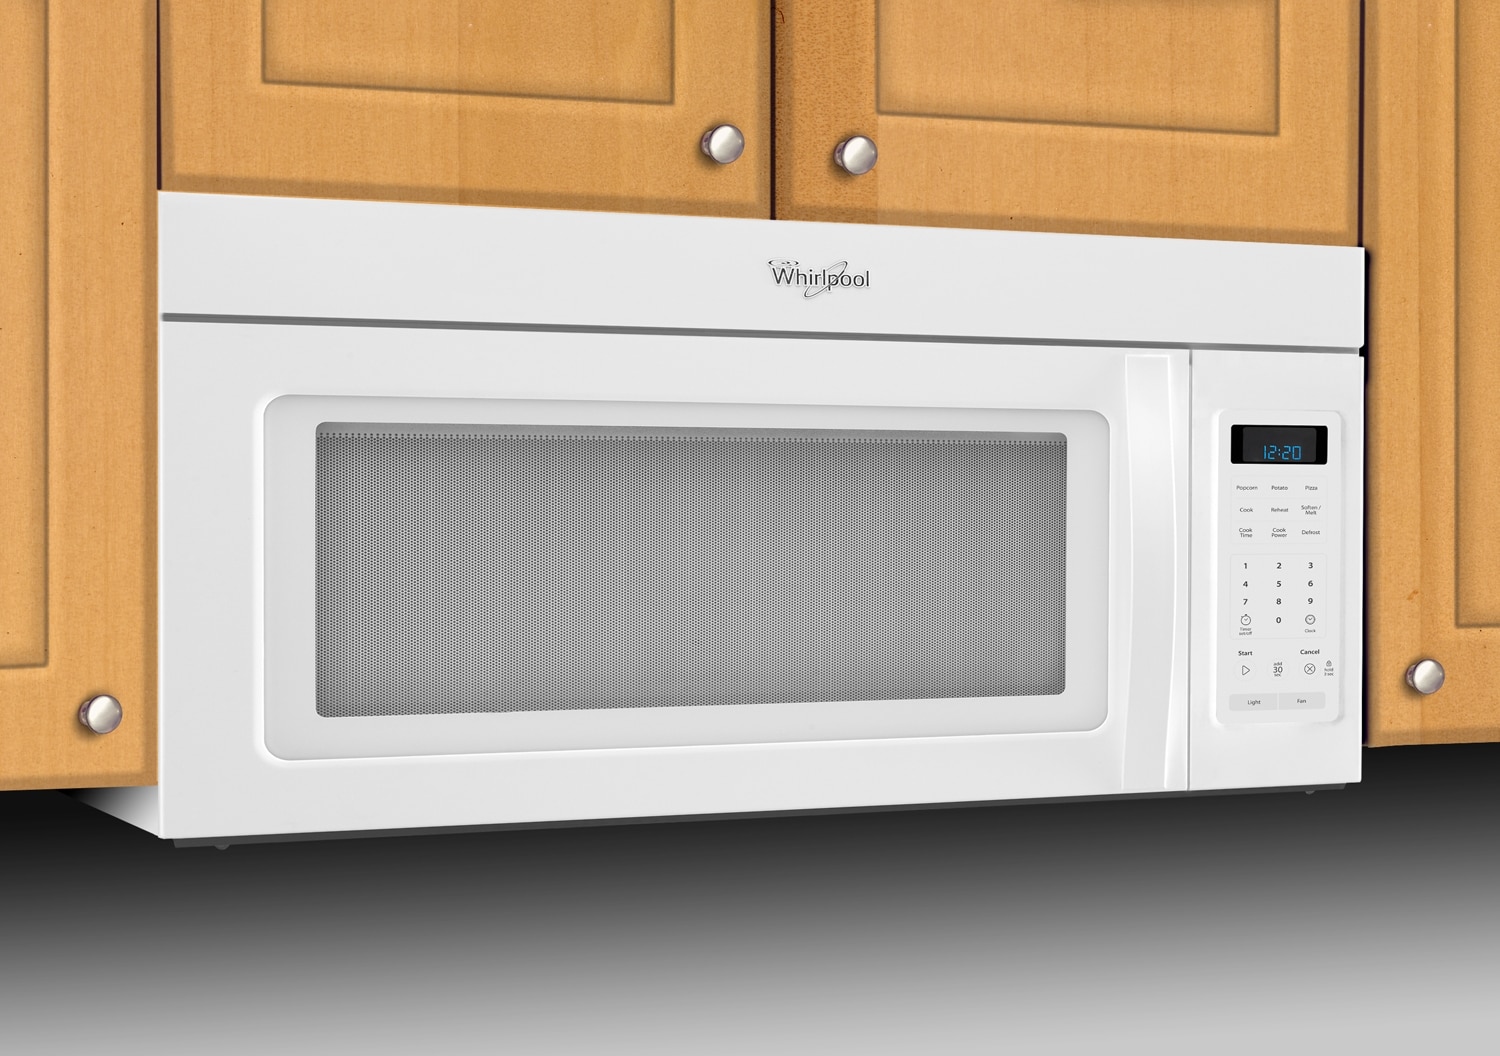 Whirlpool Over The Range Microwave Dimensions checkwindows